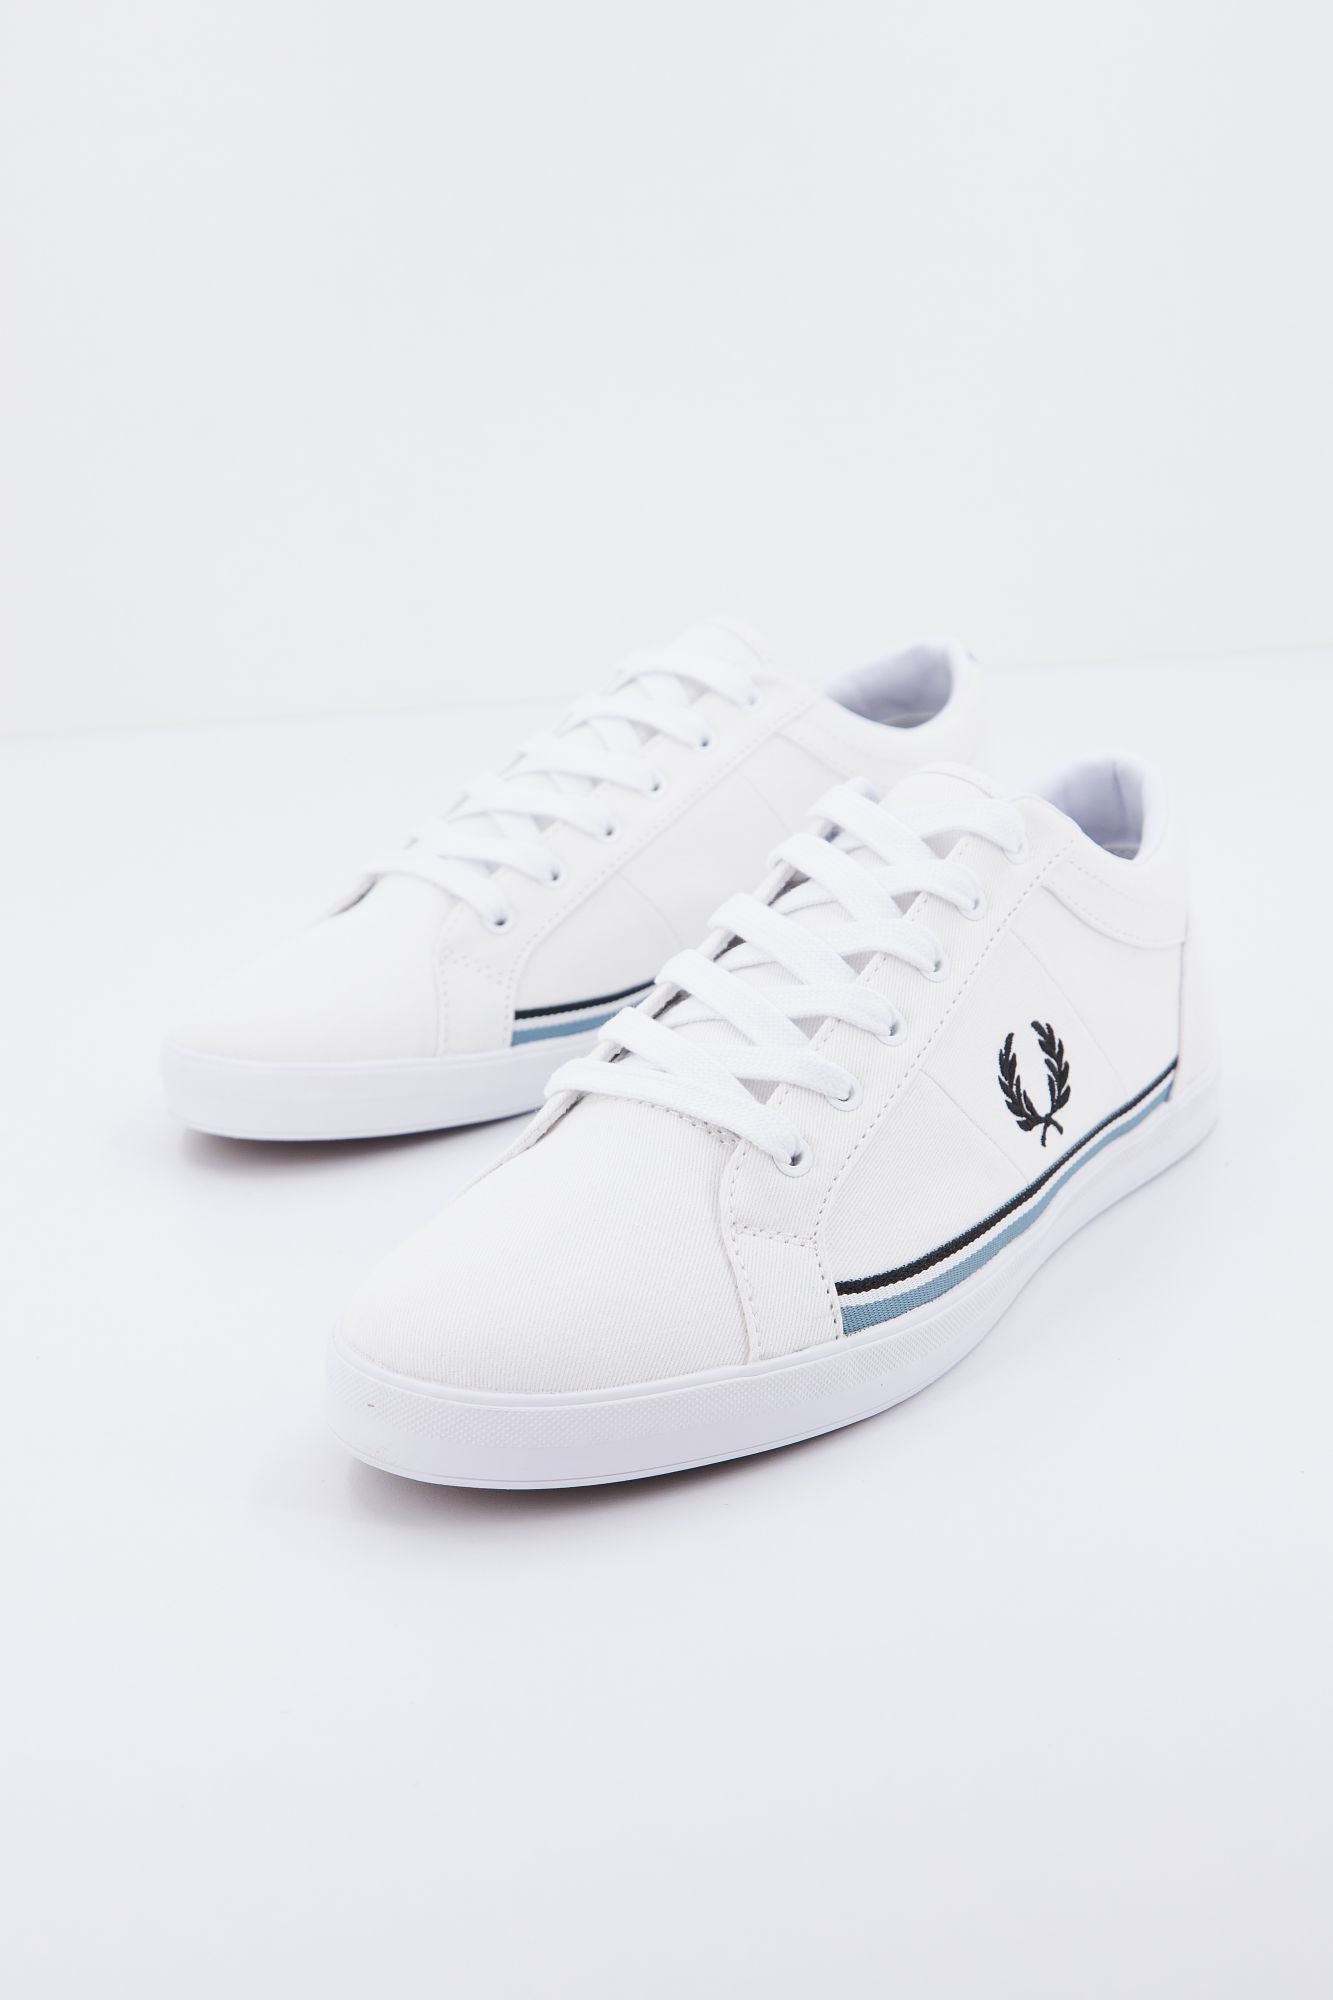 FRED PERRY BASELINE TWILL en color BLANCO (3)